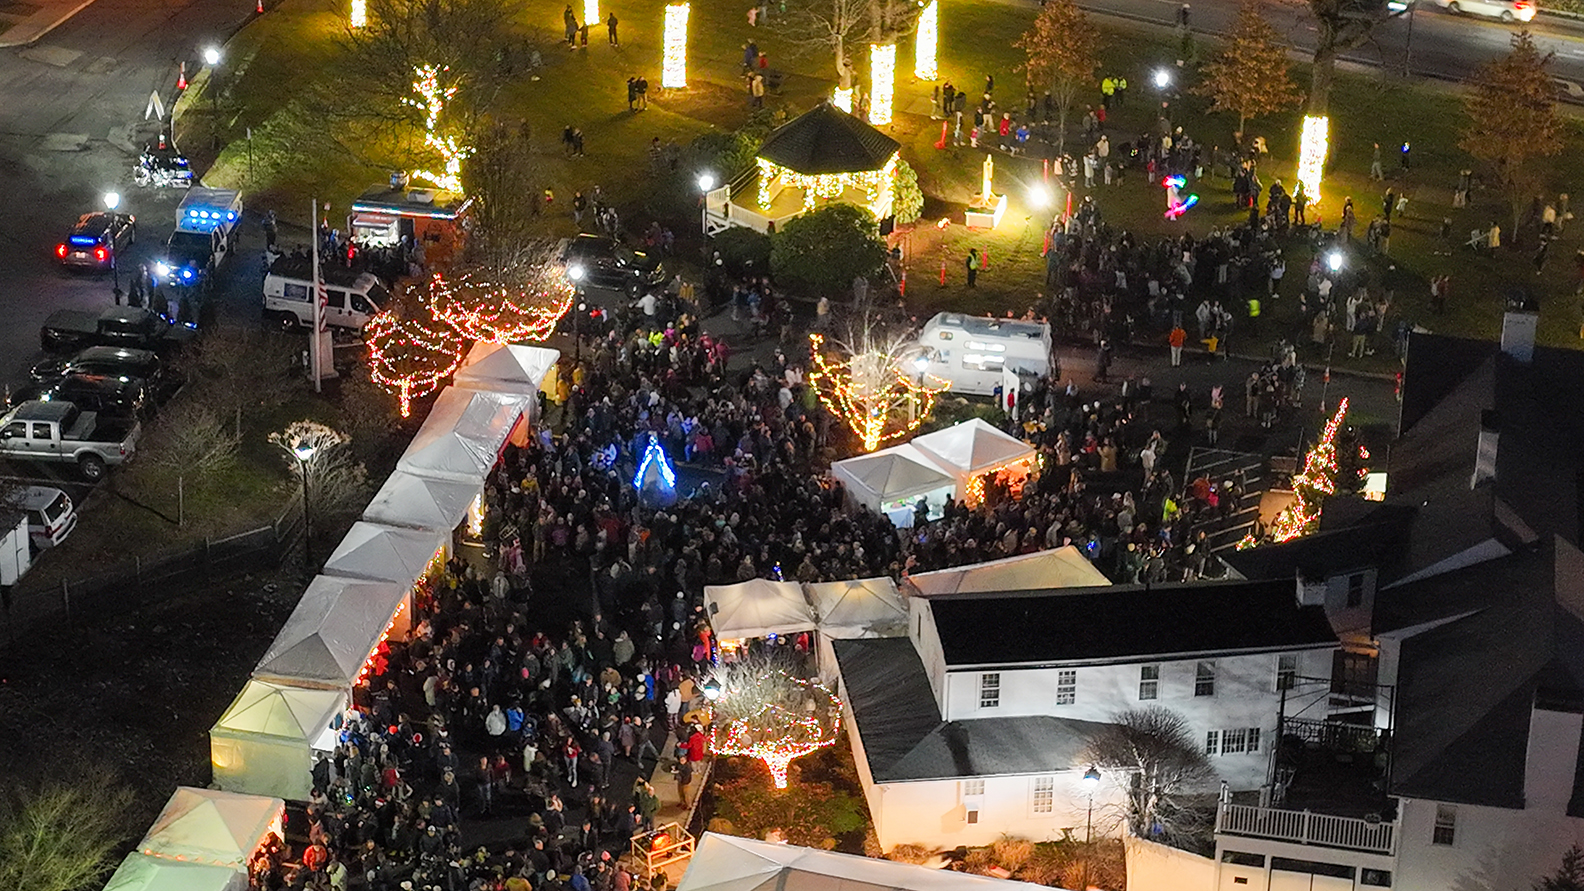 Shrewsbury rings in holidays with Yuletide Market, Light the Common